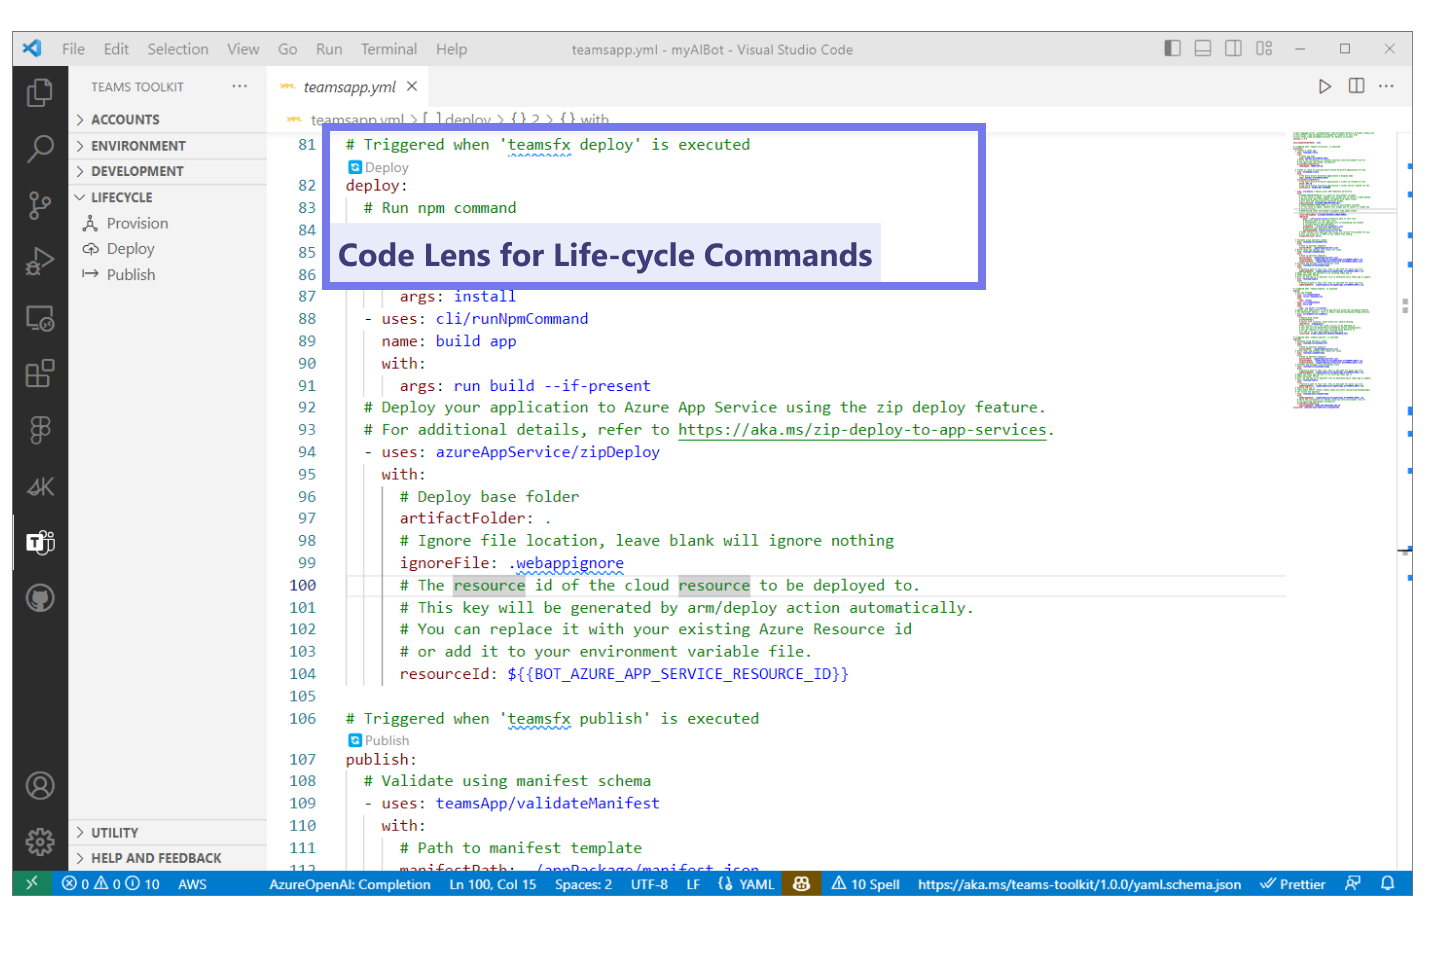 Screenshot showing Visual Studio Code running in Teams Toolkit, running life-cycle commands (with Code Lens) after editing the file.